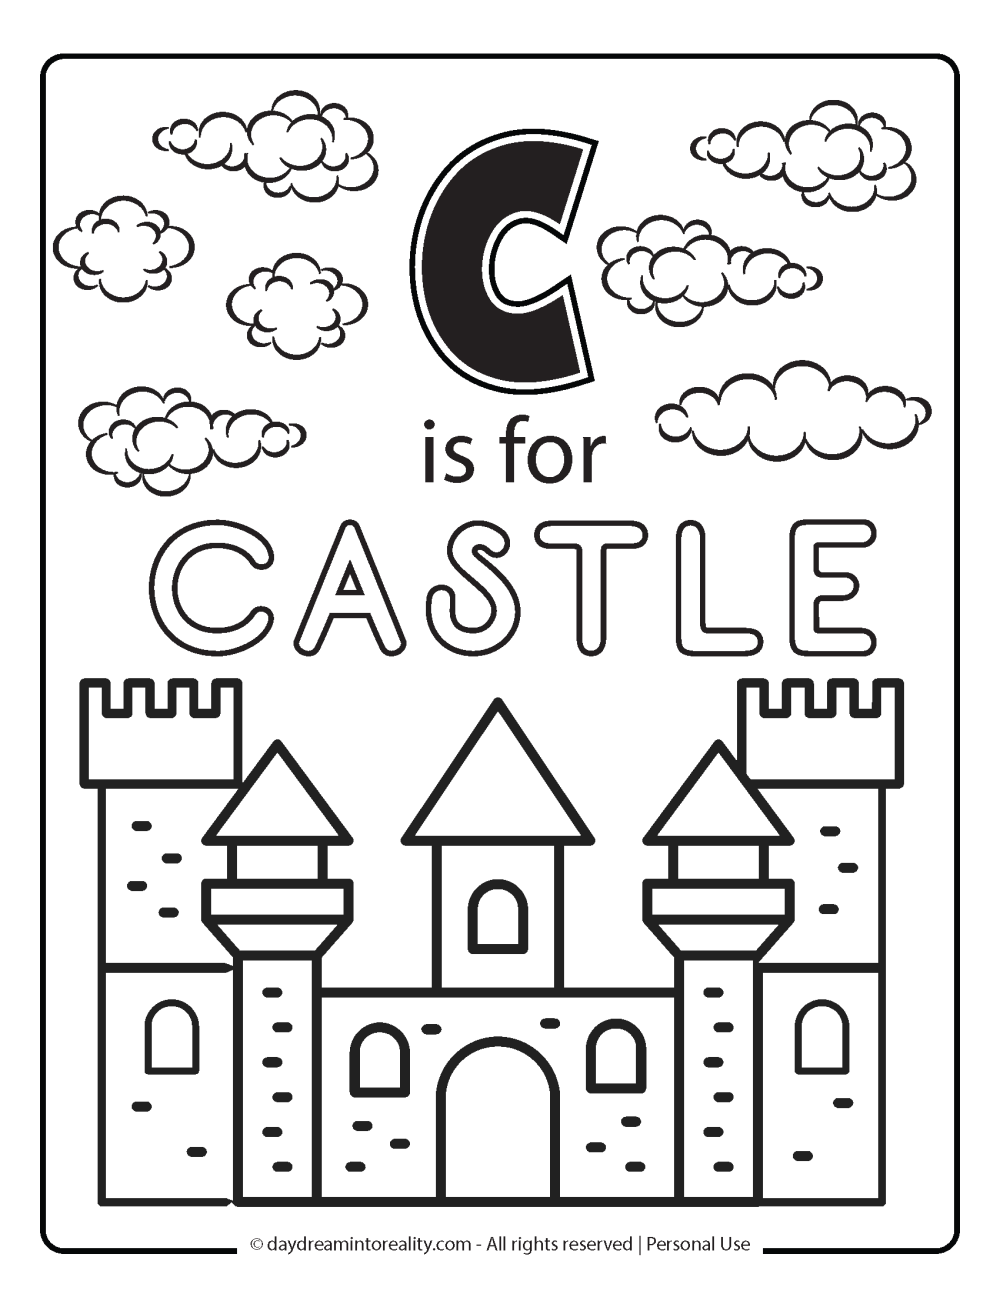 Letter C coloring page free printable - c is for castle